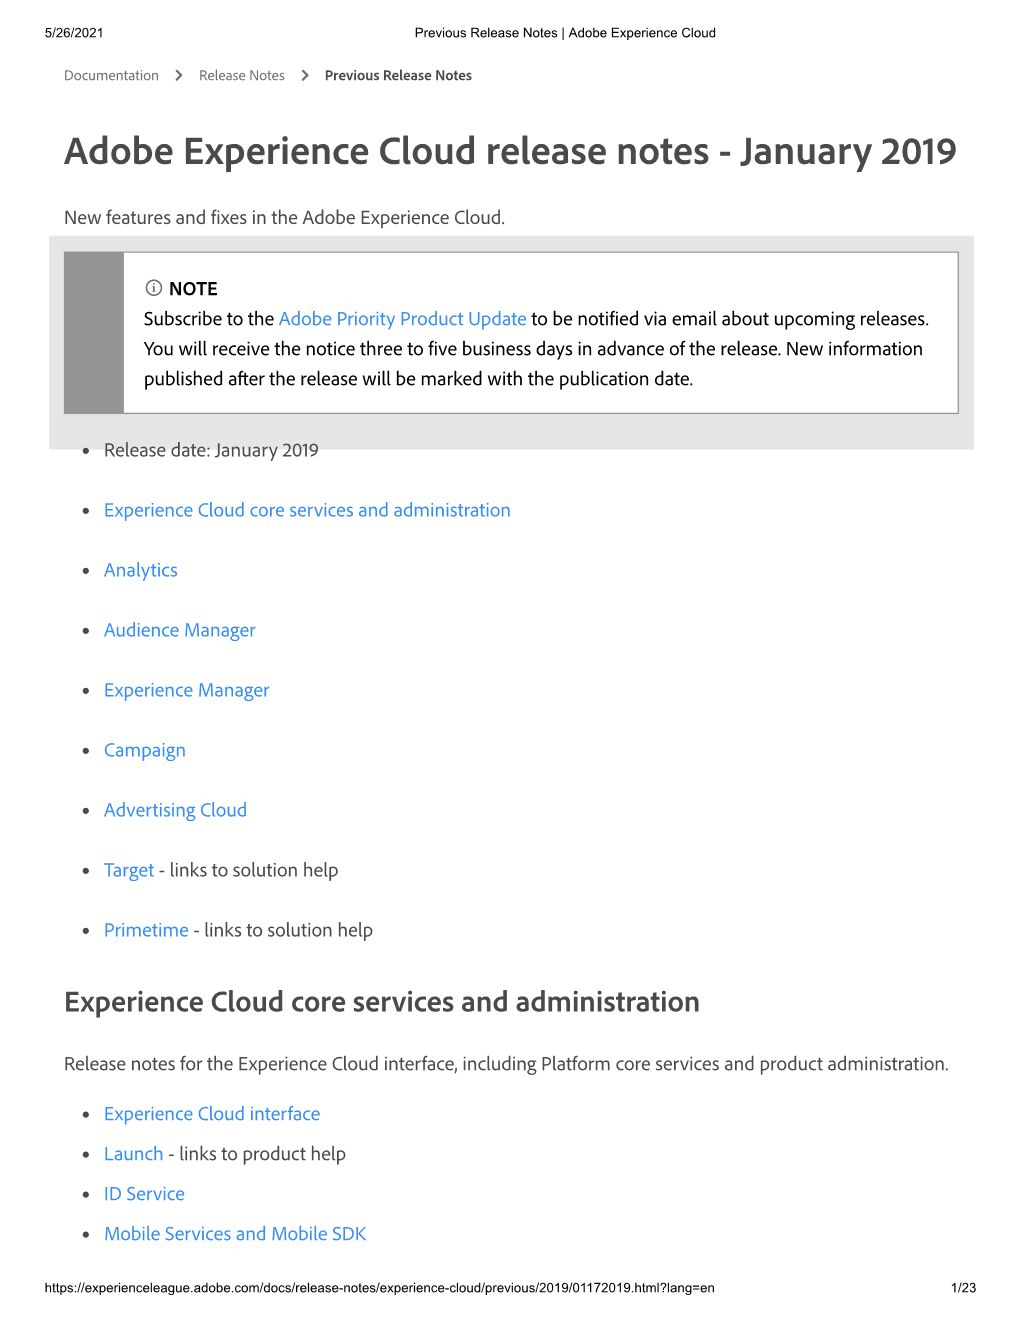 Adobe Experience Cloud Release Notes - January 2019